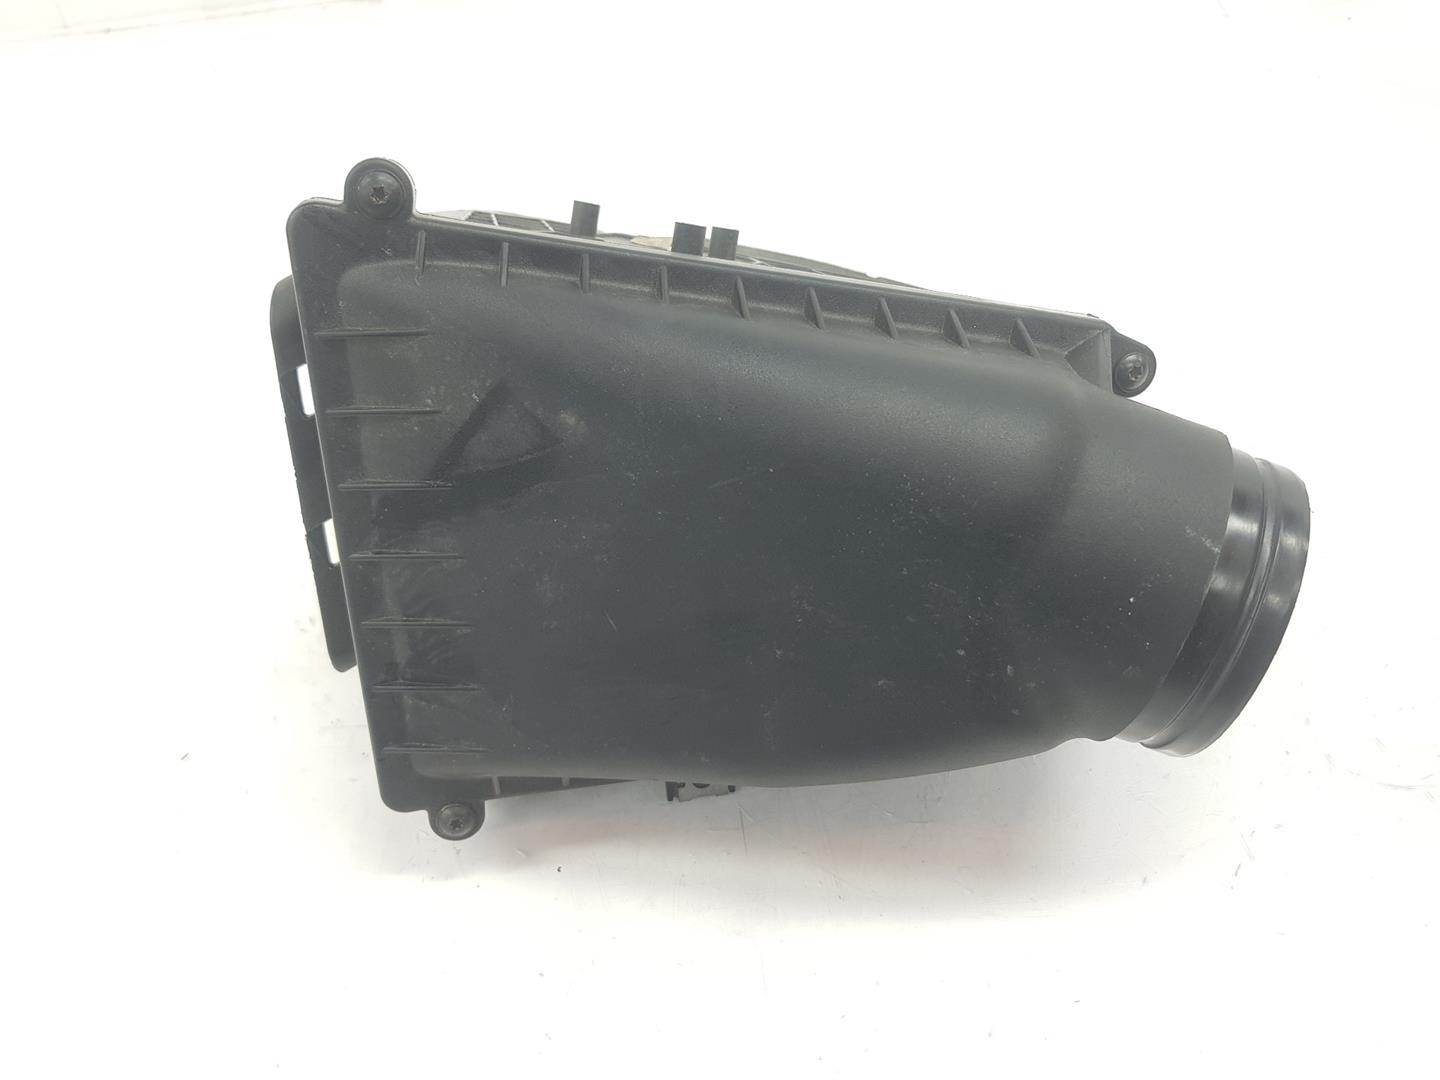 AUDI RS 4 B8 (2012-2020) Other Engine Compartment Parts 8T0133836B, 8T0133836B 24174594